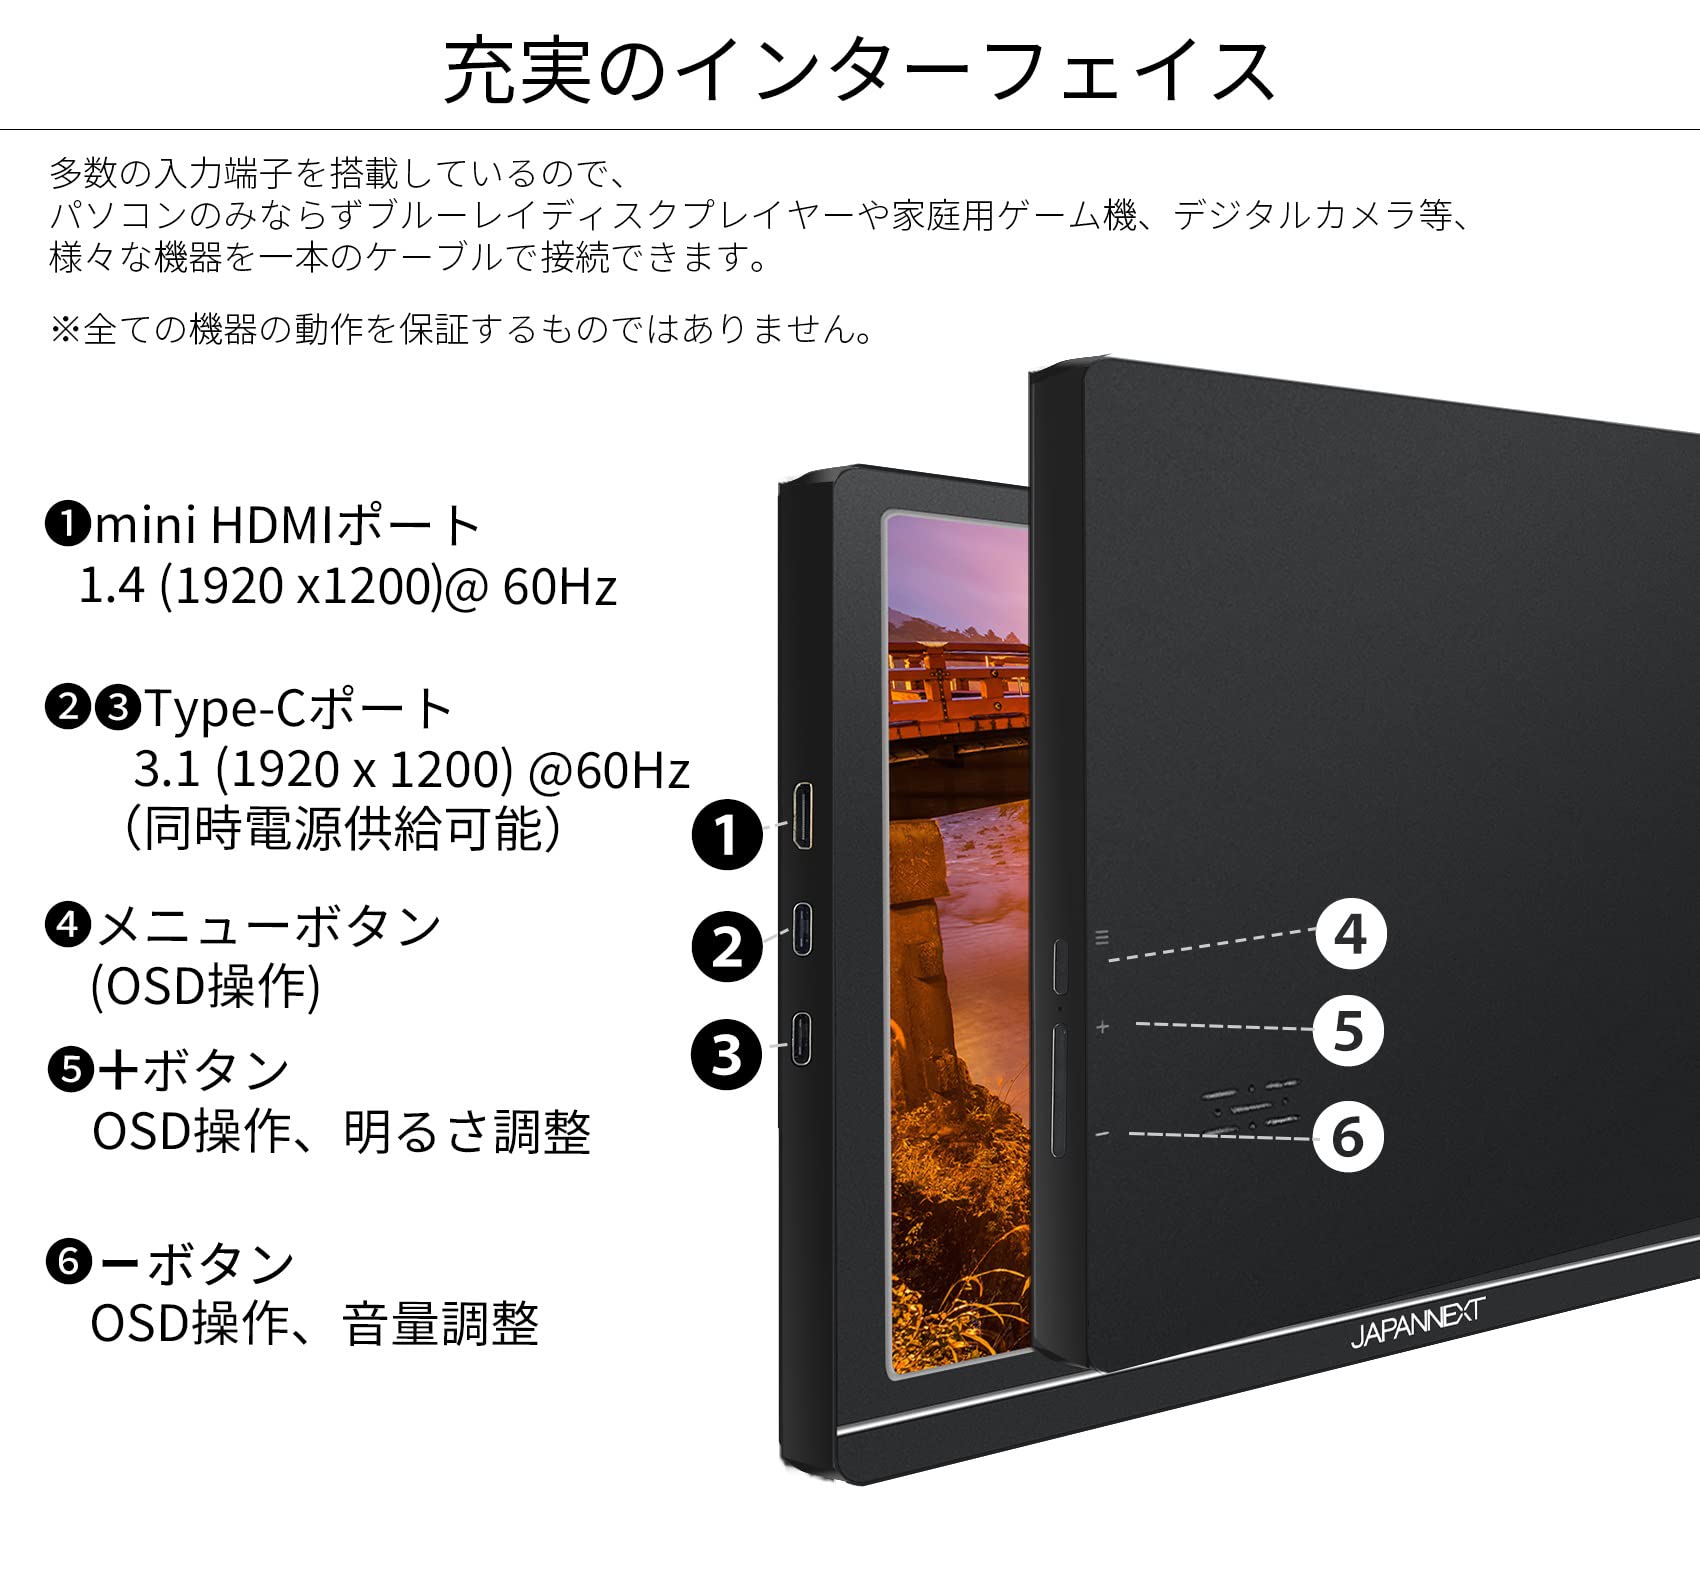 JapanNext JN-MD-IPS1012HDR 10.1-Inch 1920x1200 Resolution Mobile Monitor, USB Type-C Mini HDMI